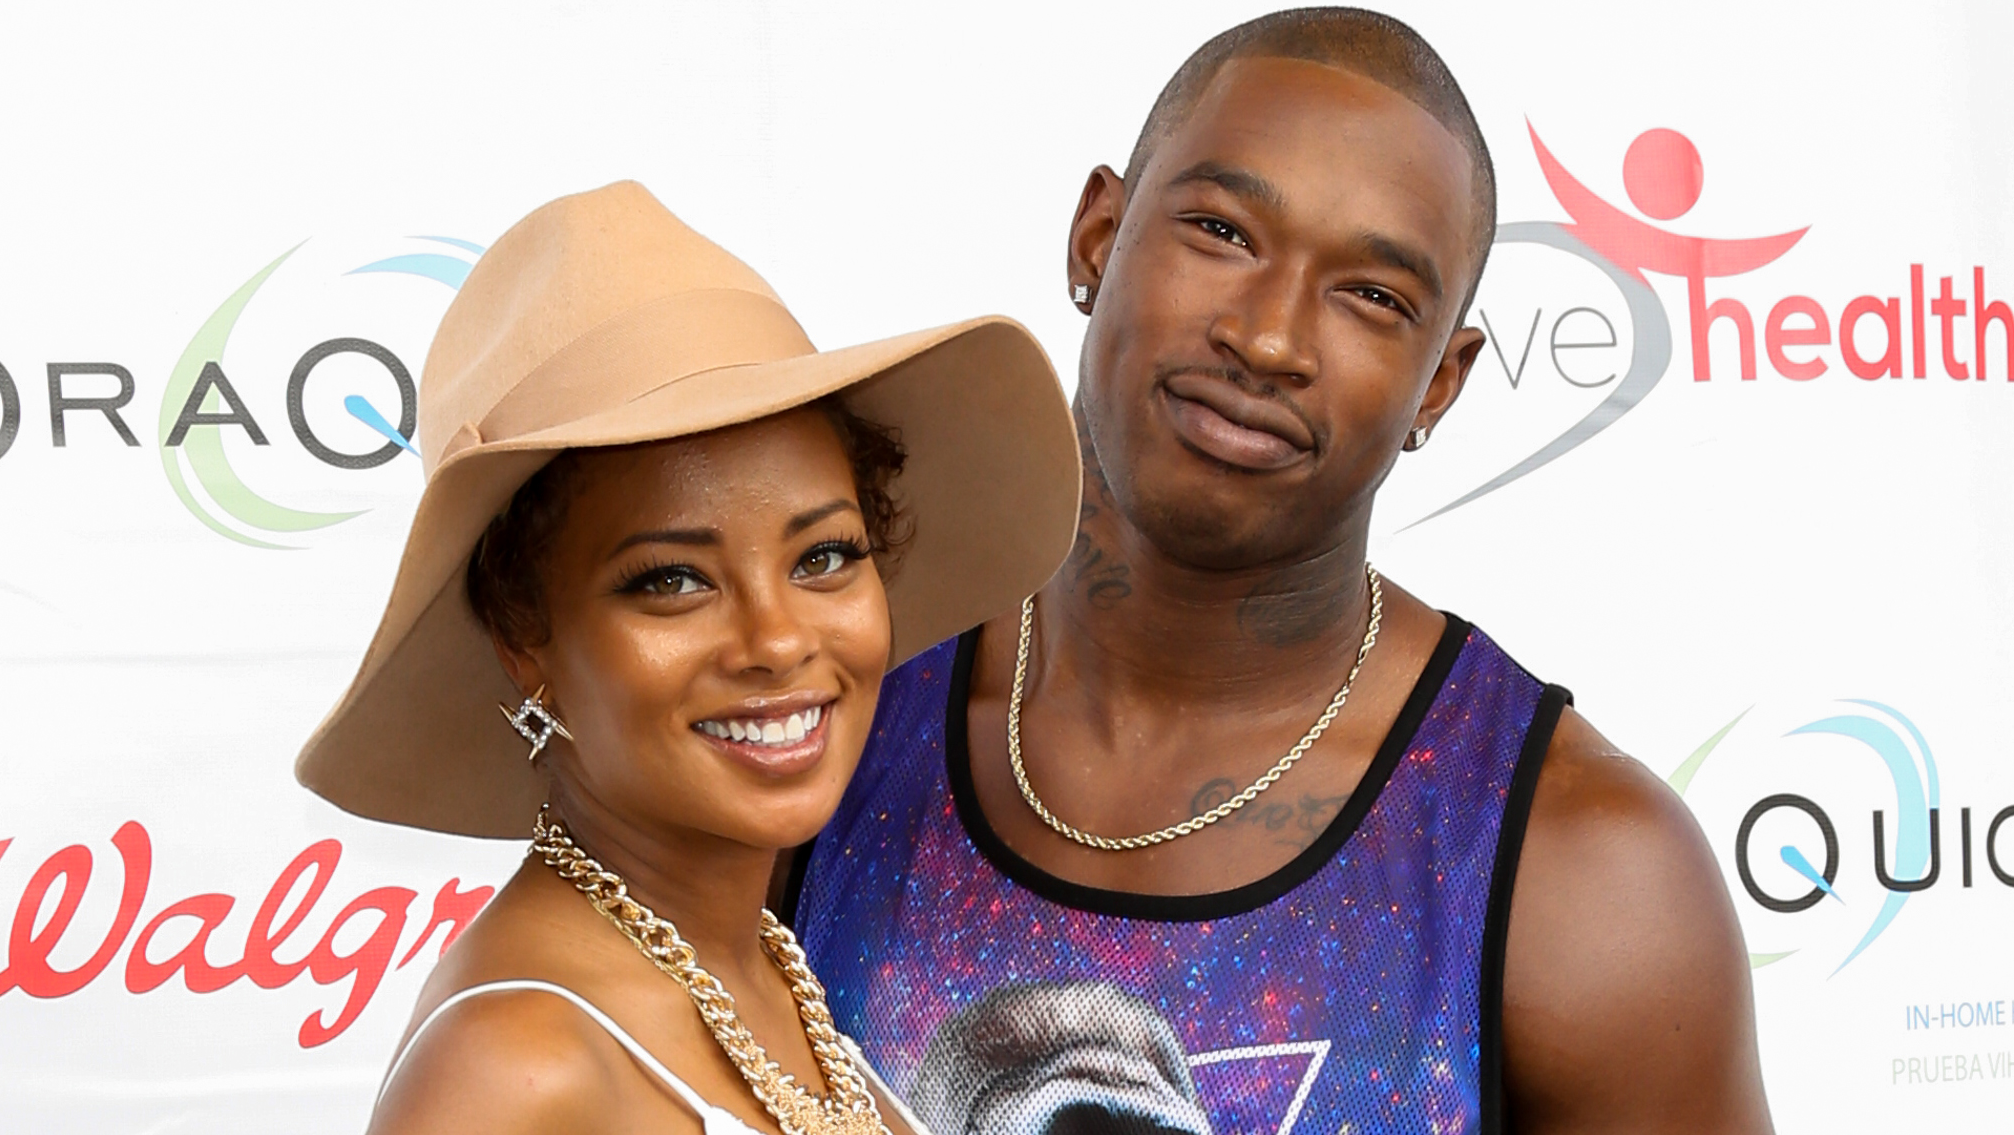 ‘RHOA’ Star Eva Marcille’s Ex Kevin McCall Writes Cryptic Message To Chris Brown, Friends Concerned